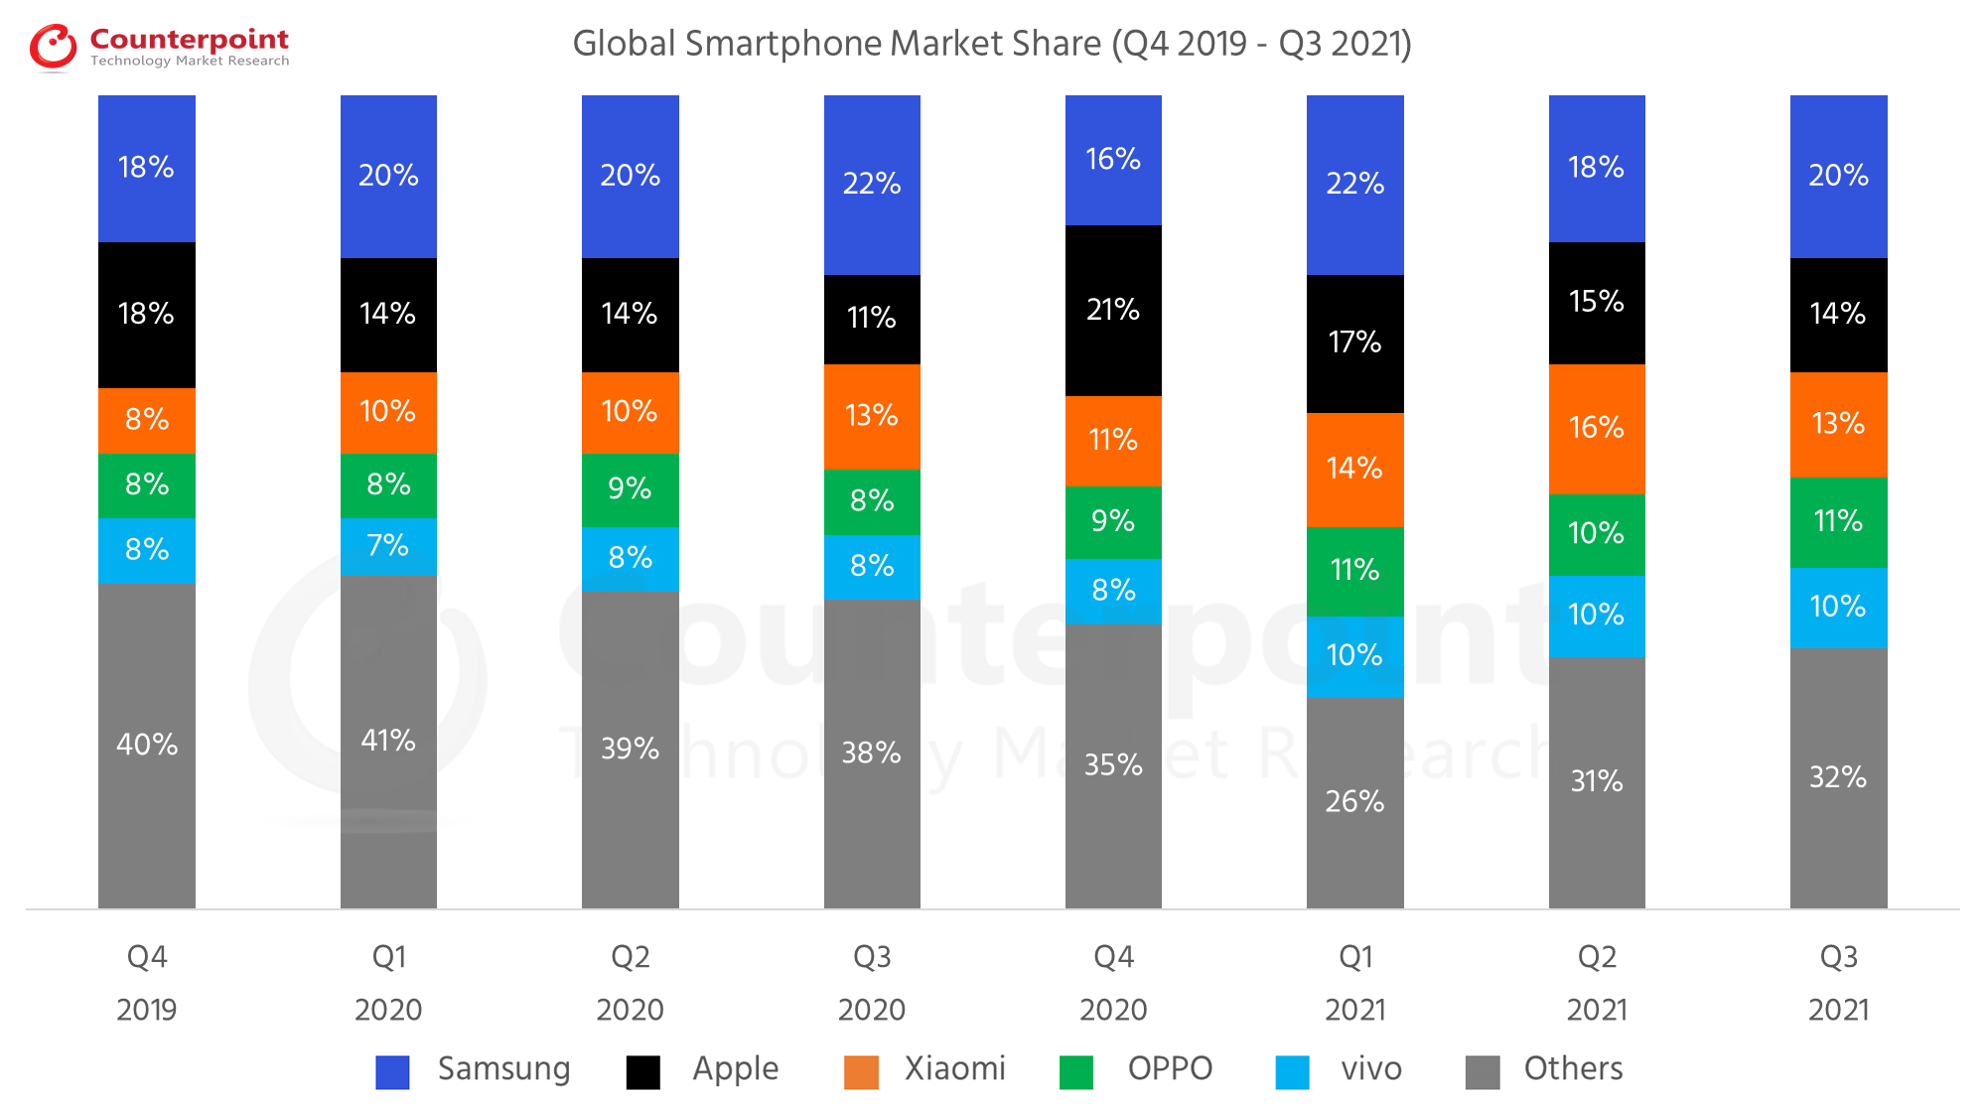 Counterpoint Research - Q3 2021 - Global Smartphone Market